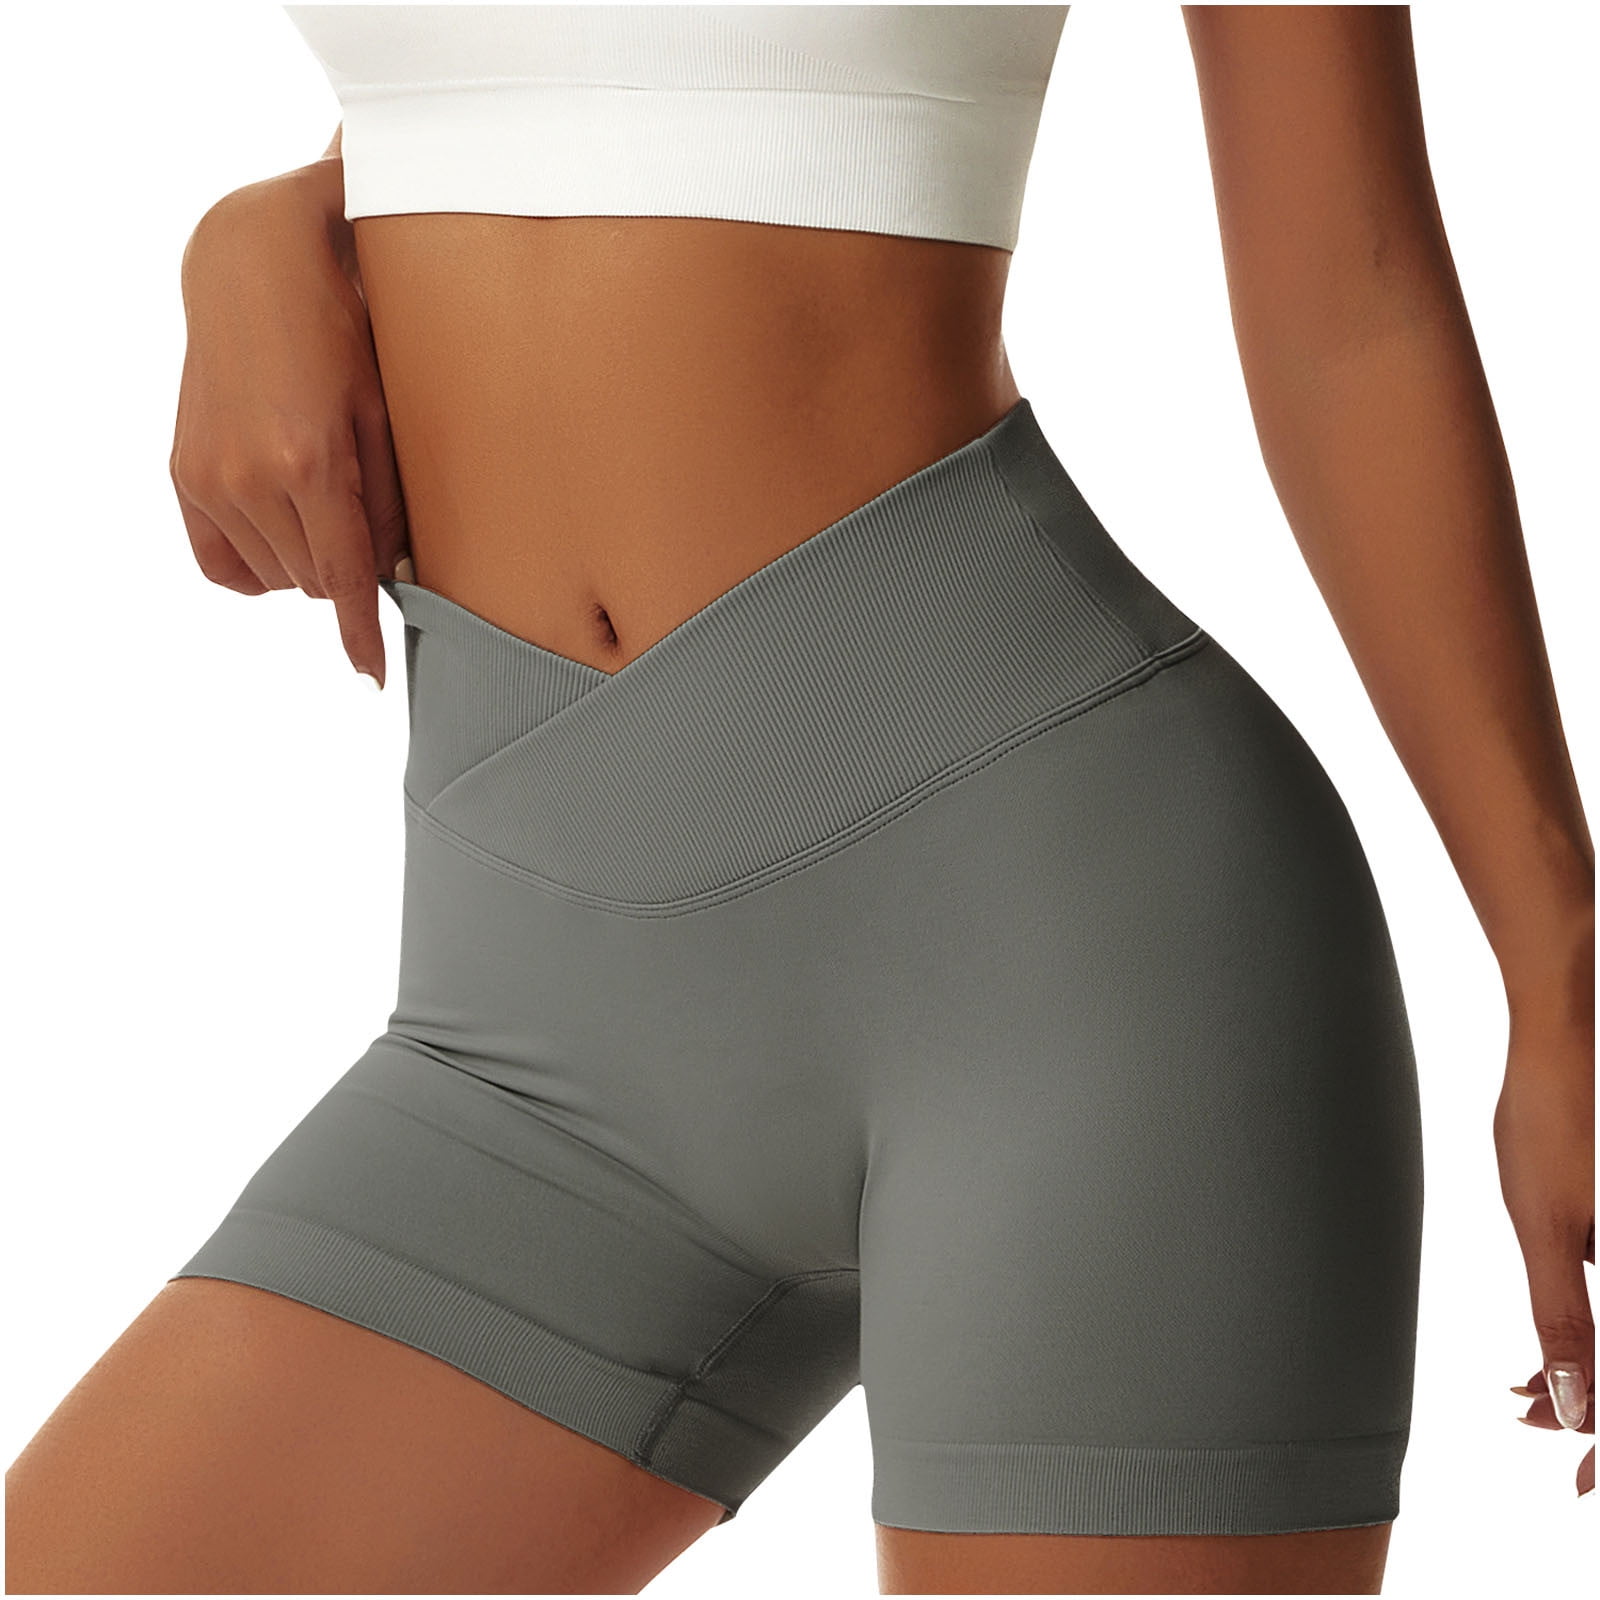 Cross Waist V Cut  Crz Yoga Shorts For Women Tightened Butt Lifting  Leggings For Pilates, Gym, Fitness, Running, Dance, And Cycling Outdoor  Sports Pants Style #230808 From Qiyuan03, $17.34